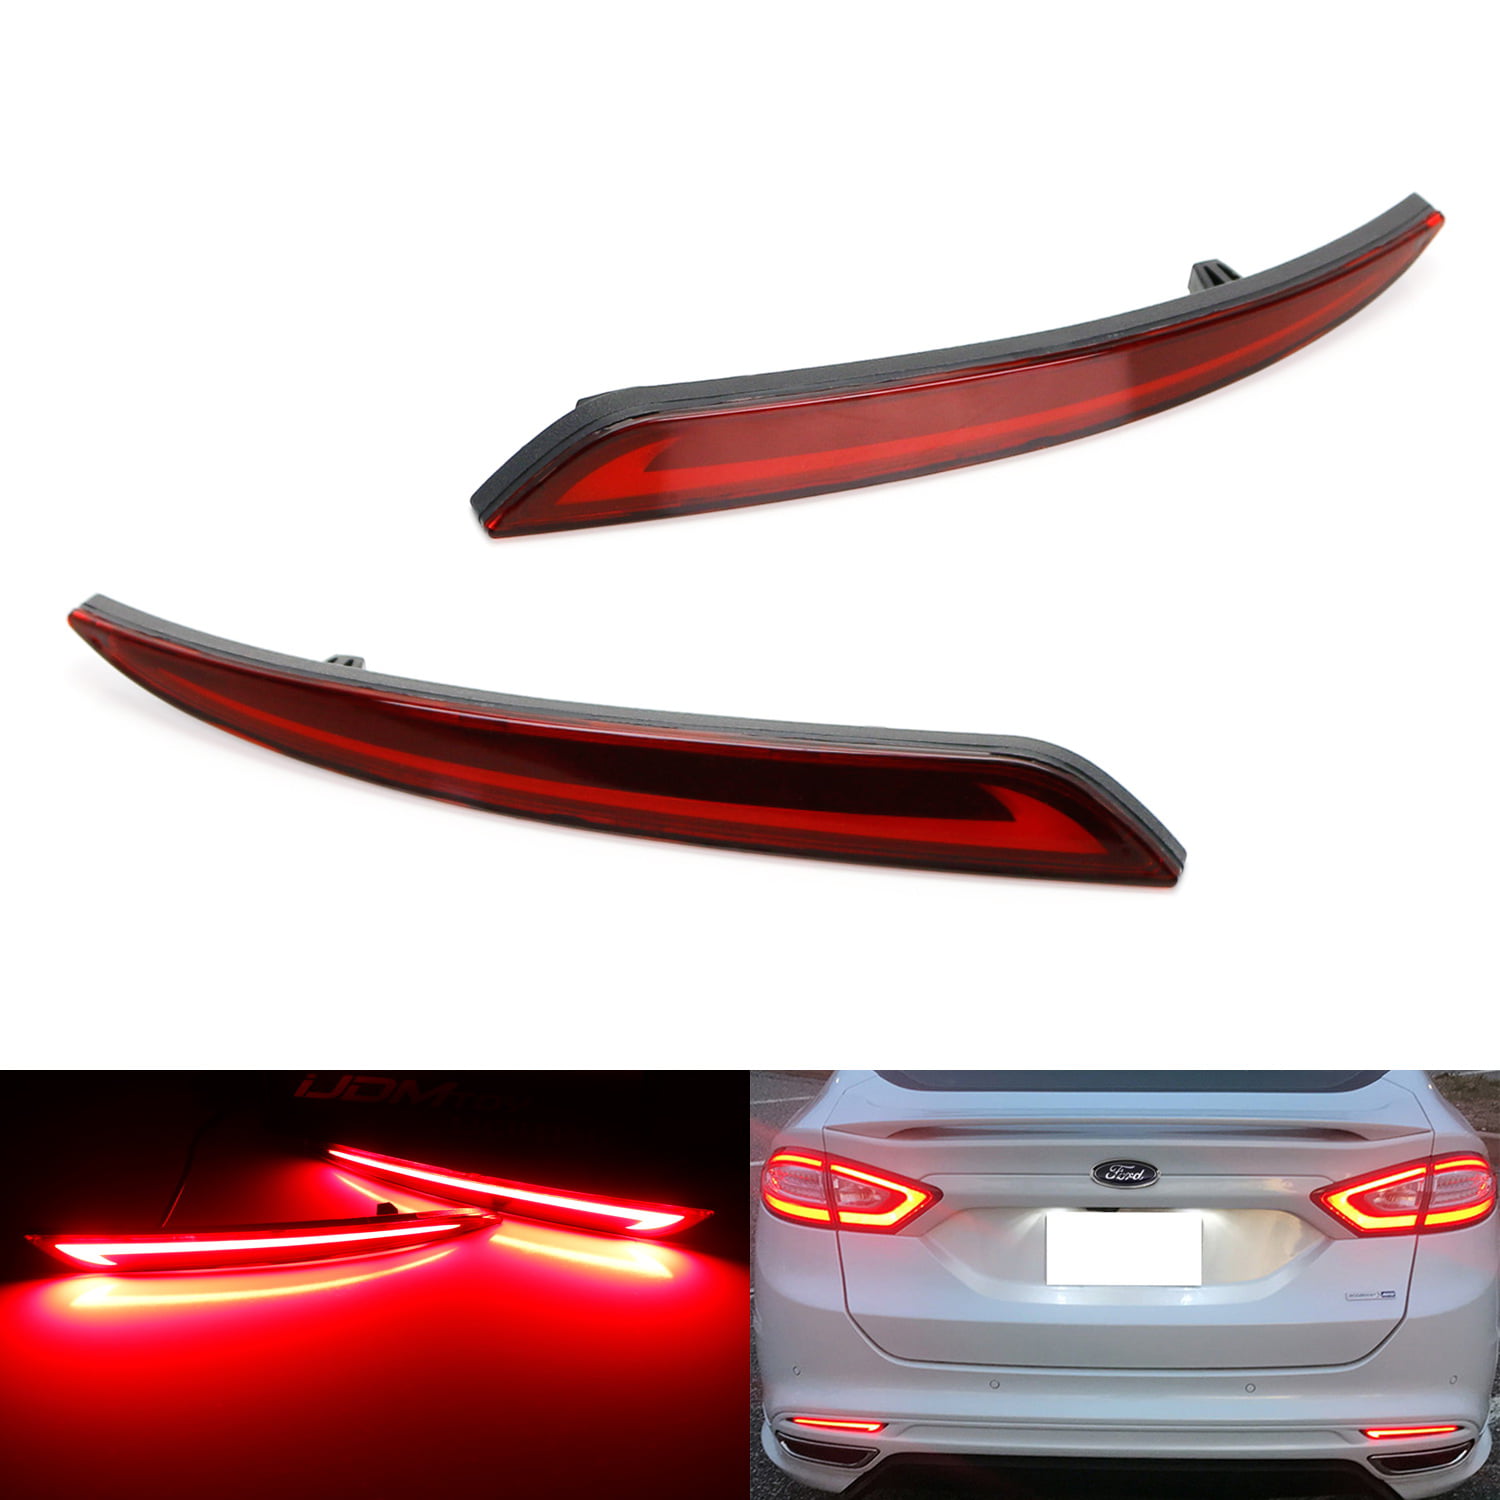 Rear Bumper Reflector Tail Light Brake Lamp fit for Ford Fusion Mondeo 2013-2016